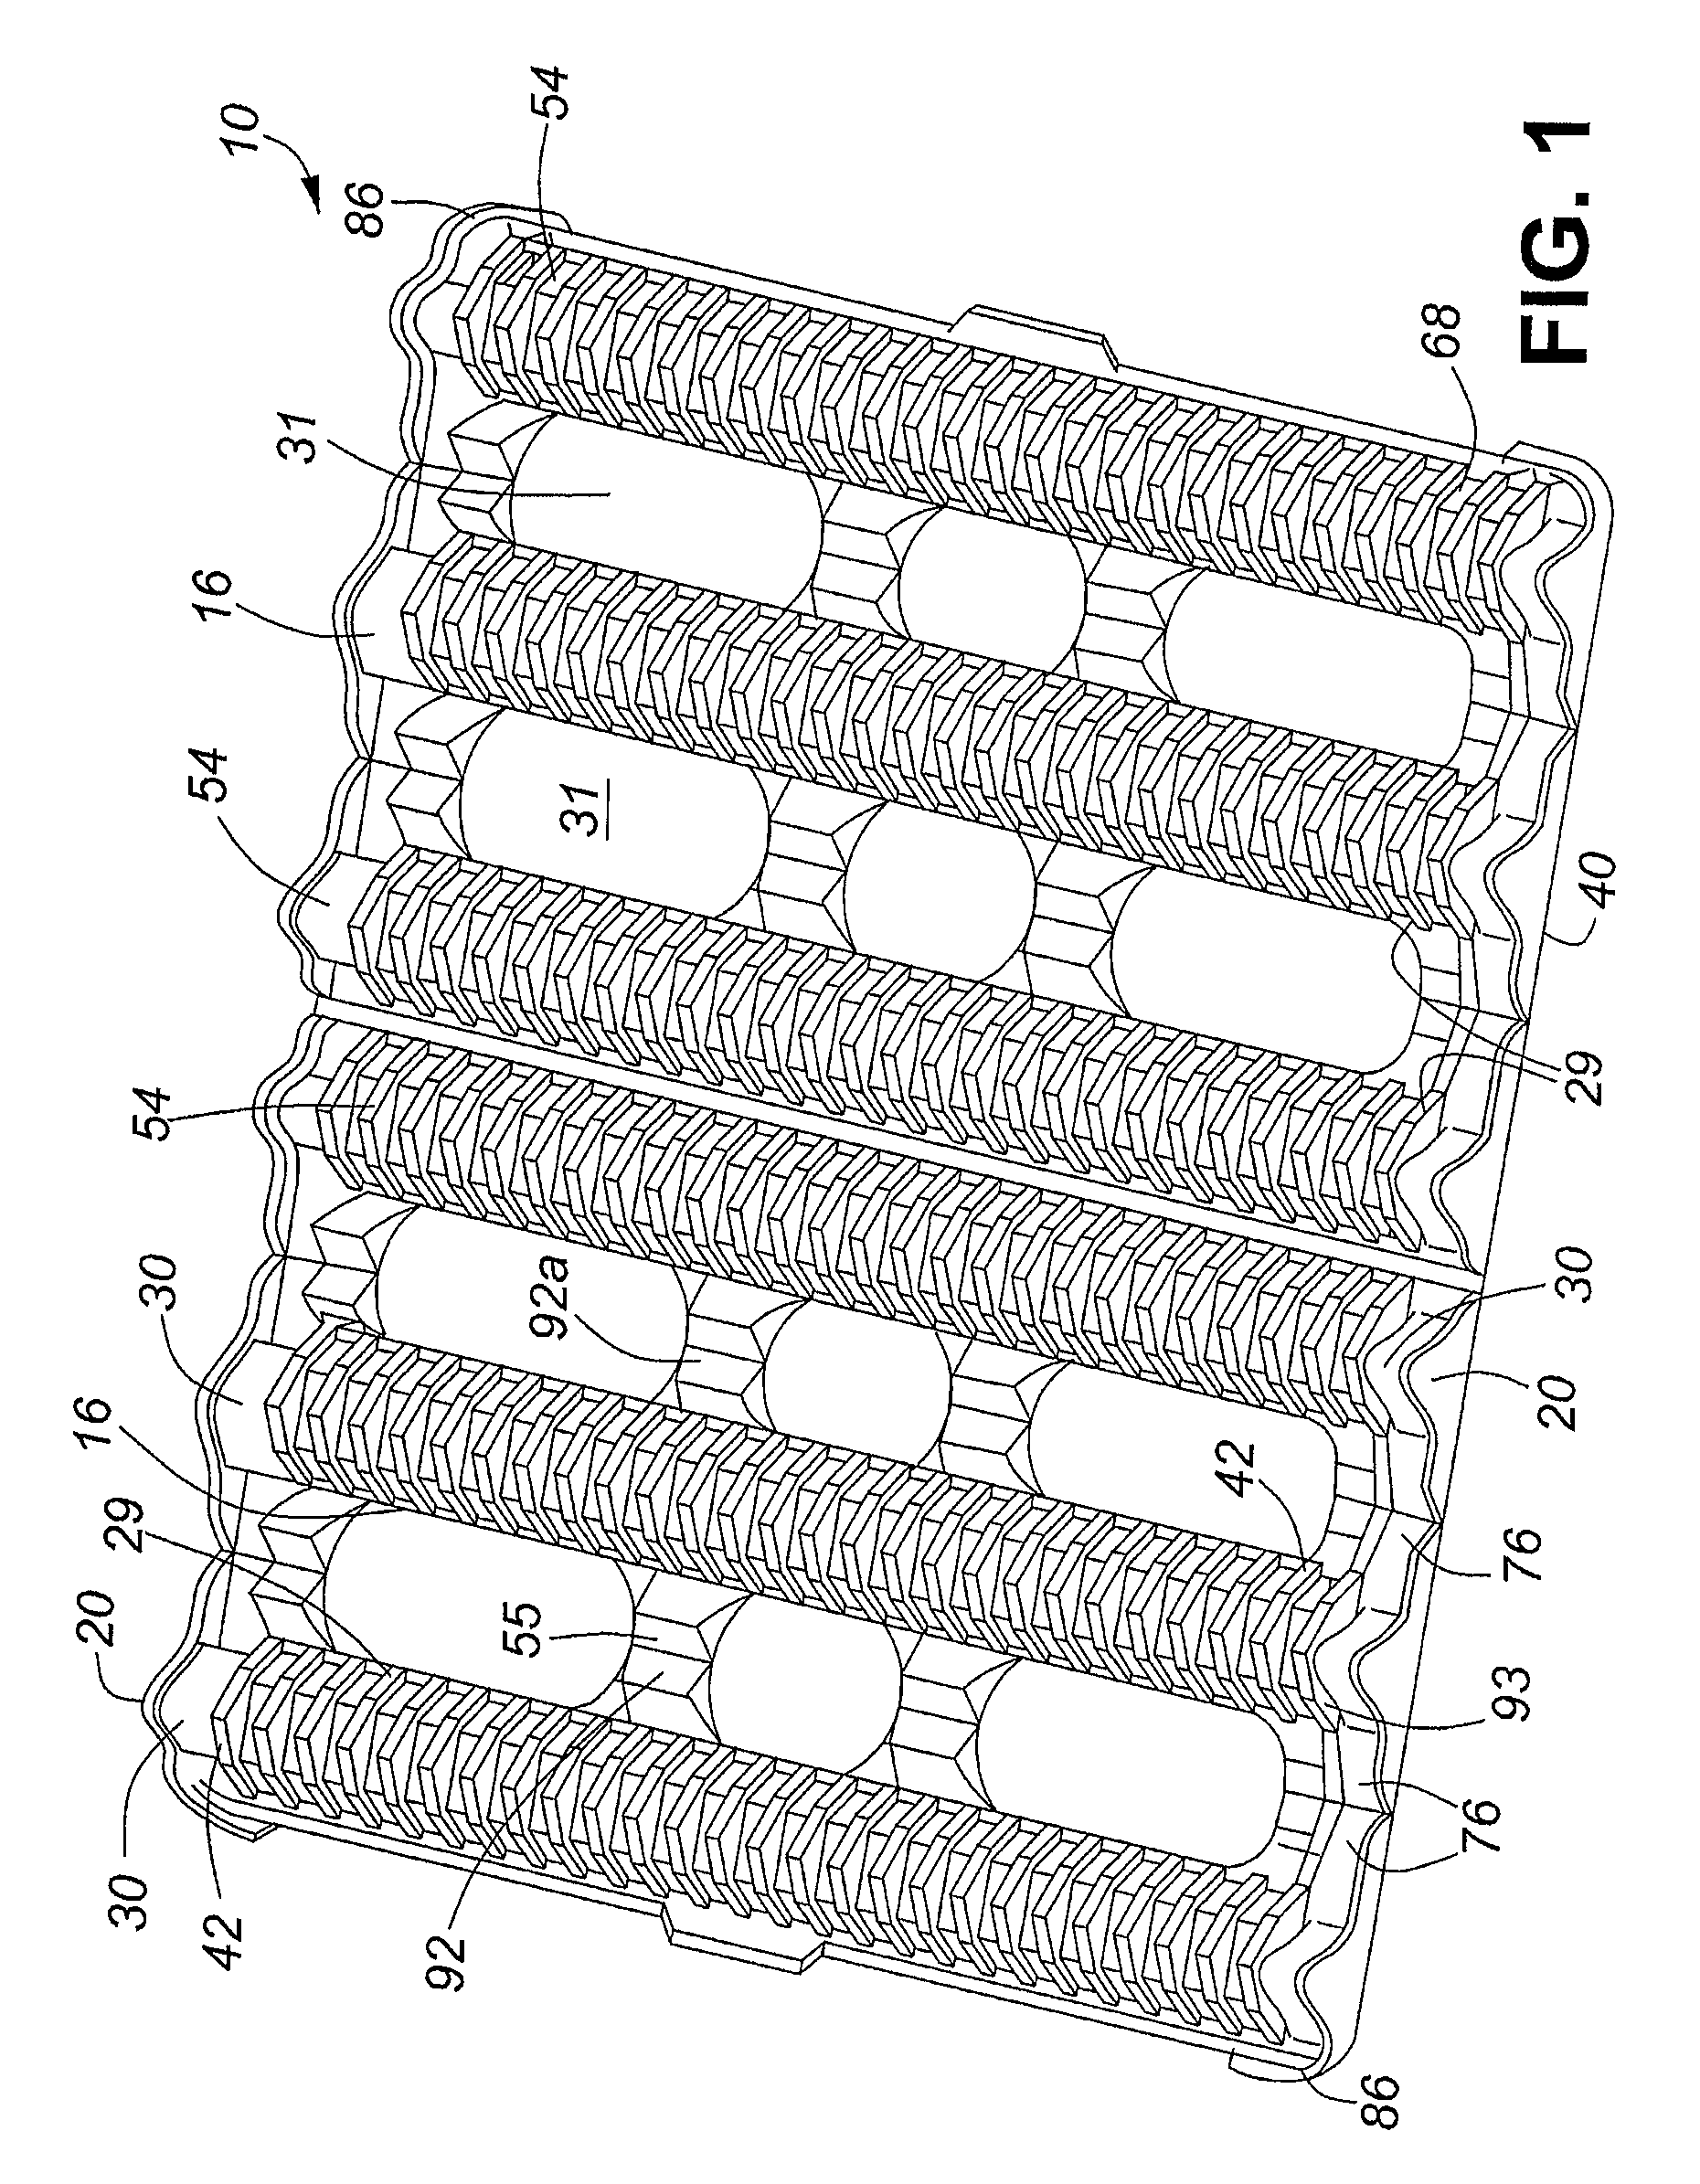 Light weight product cushioning device